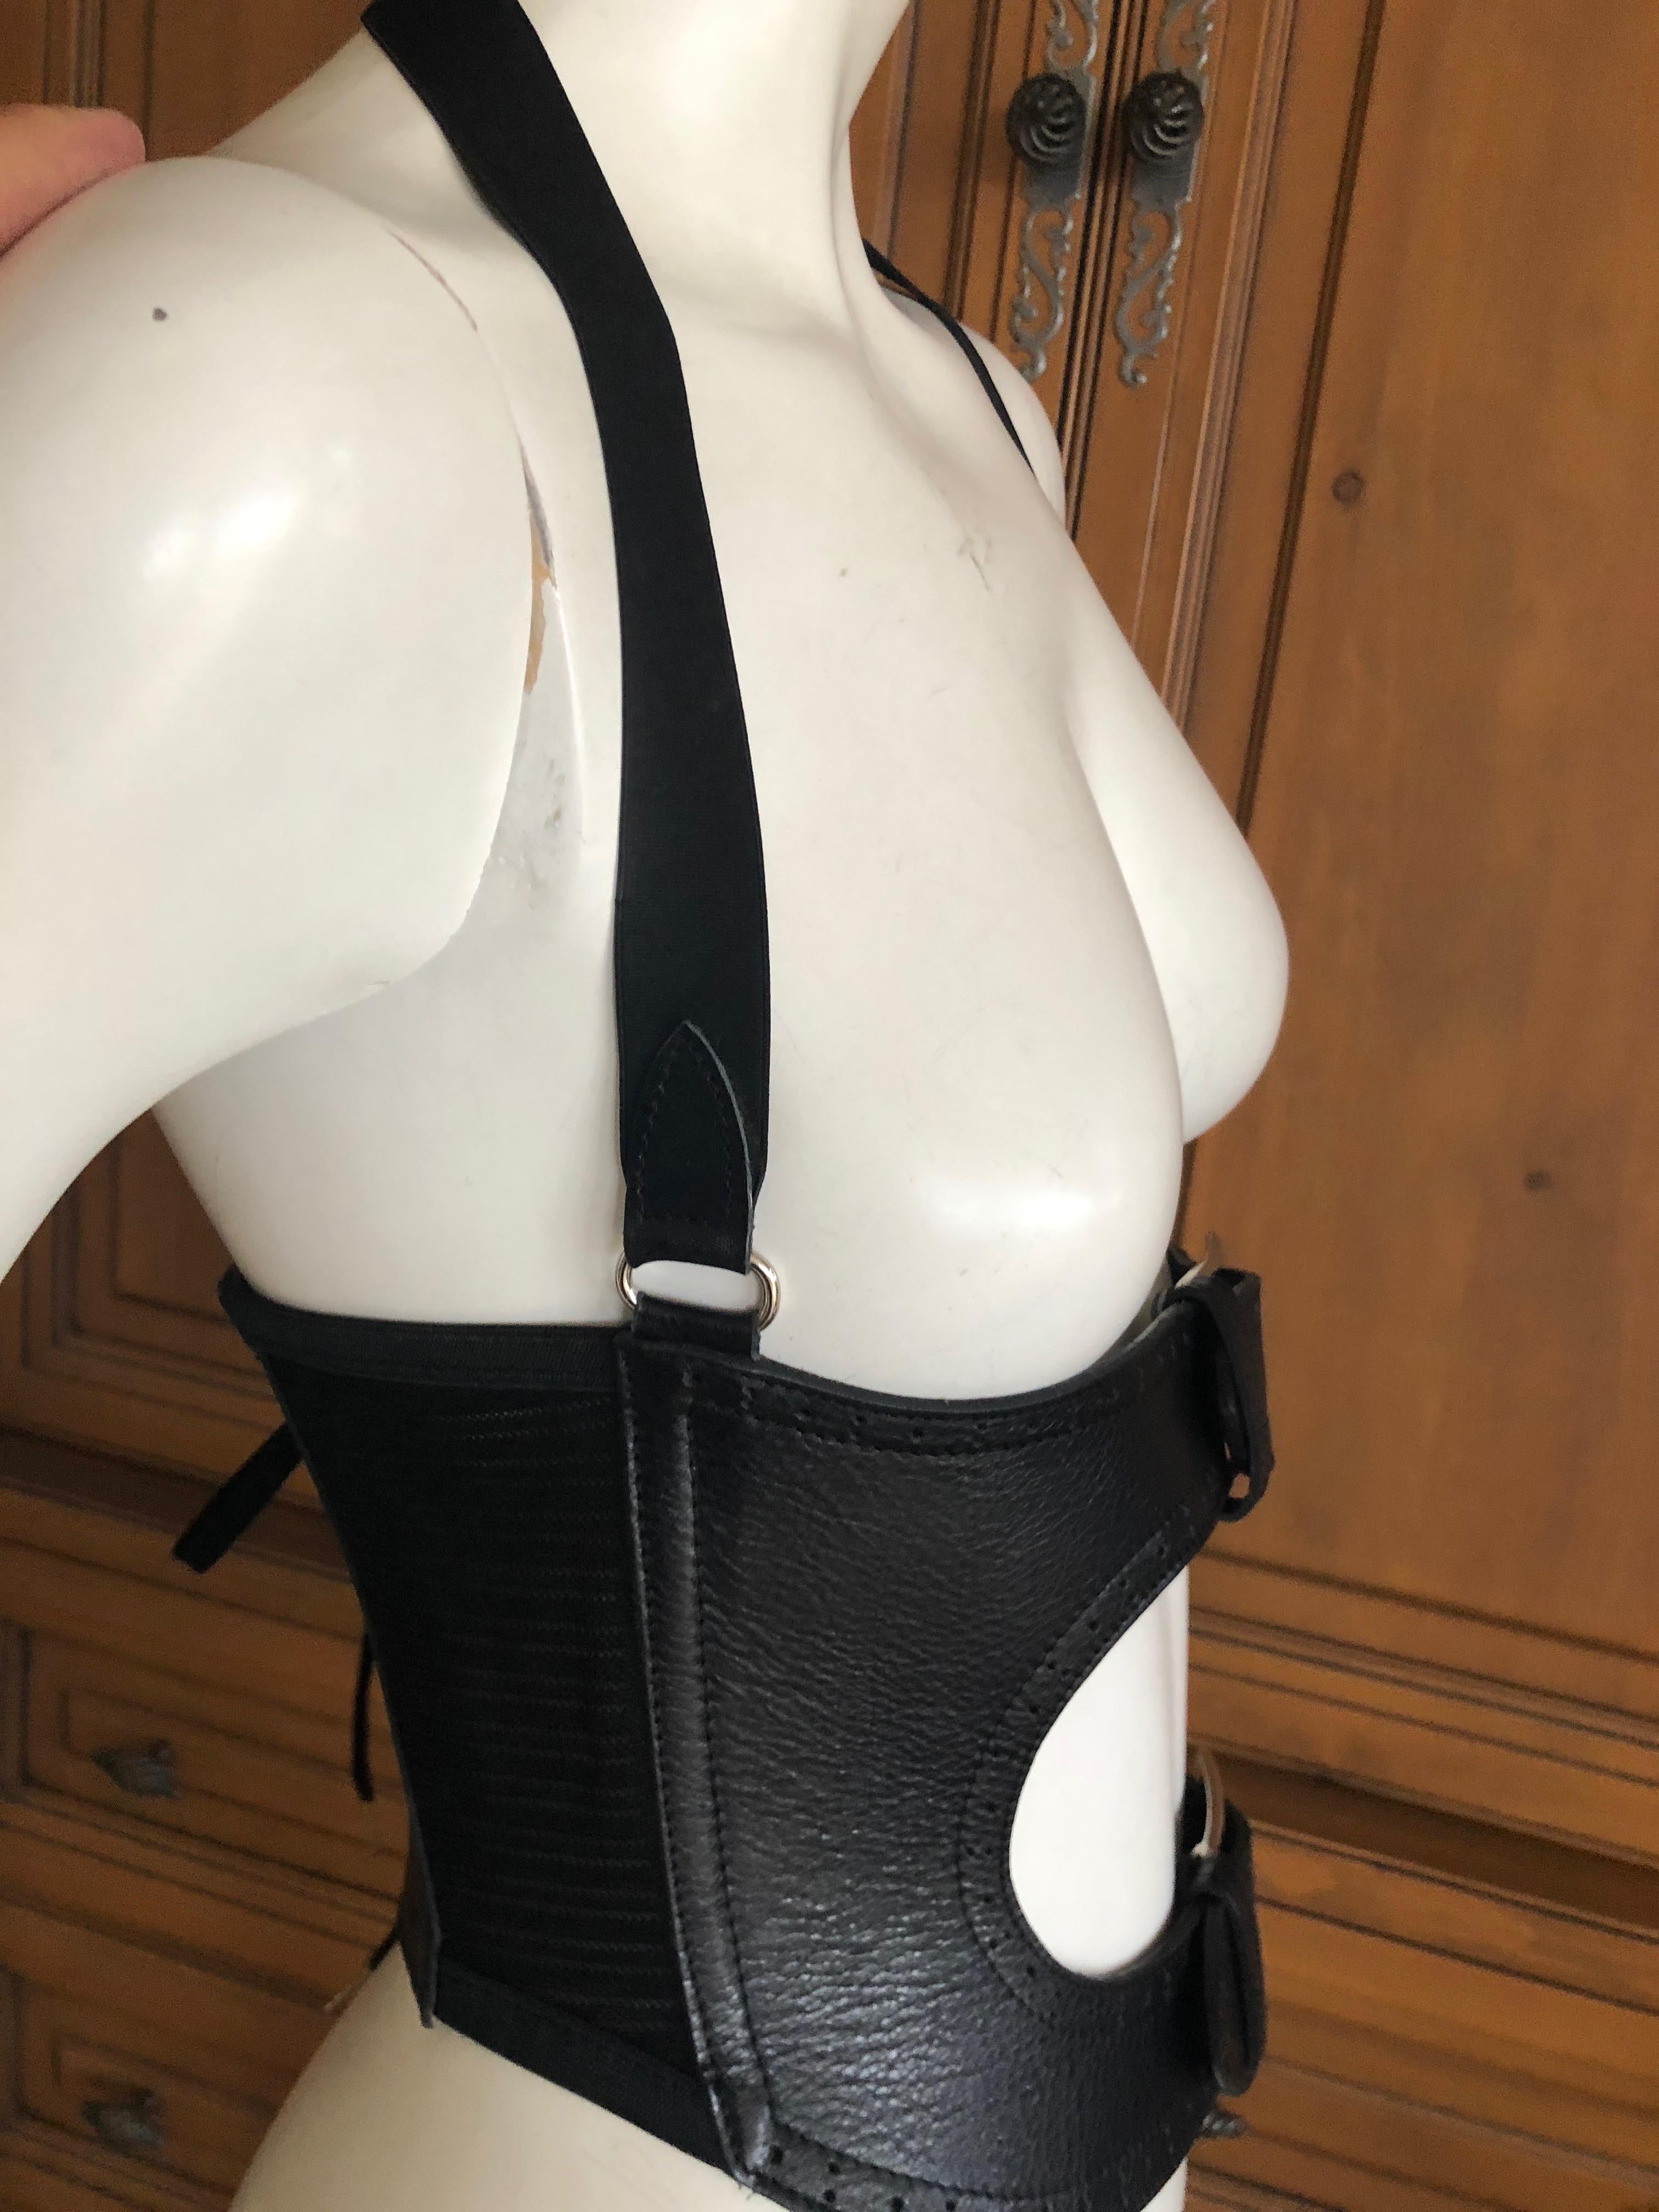 Jean Paul Gaultier Black Leather Harness with Corset Laced Details In New Condition For Sale In Cloverdale, CA